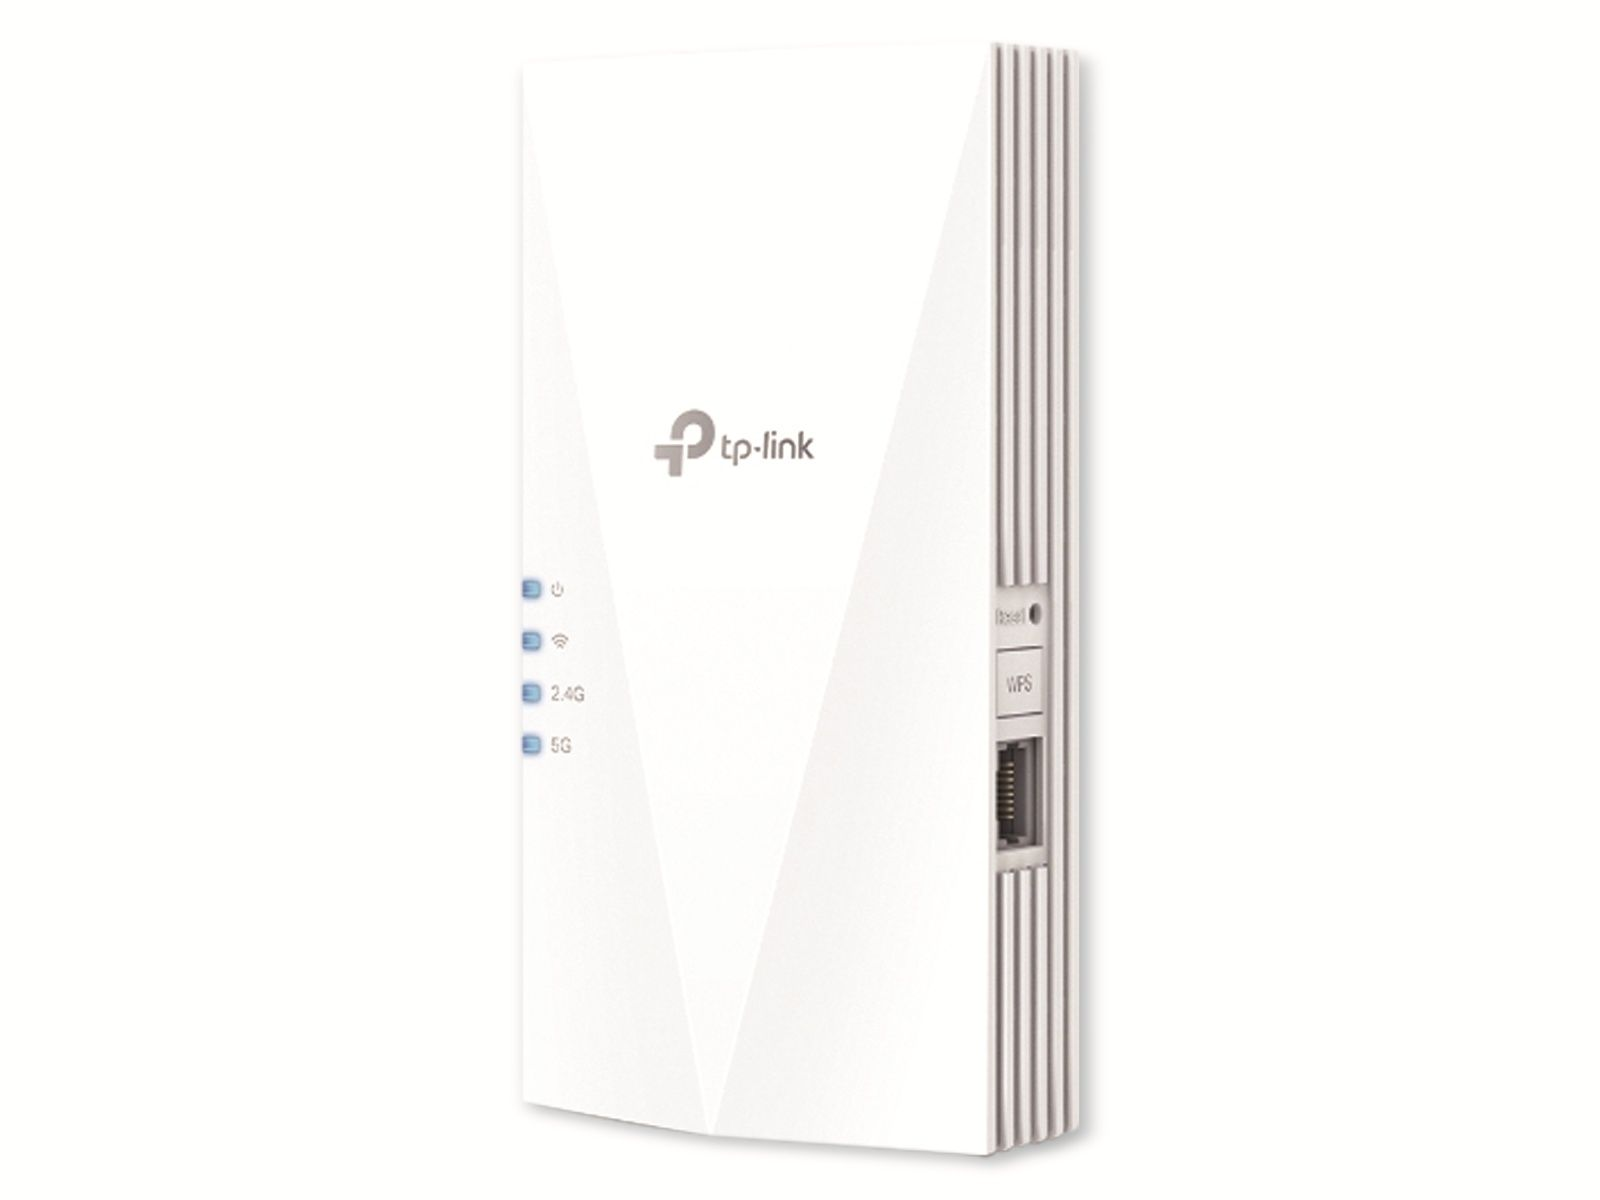 TP-LINK TP-LINK Repeater RE600X, AX1800, 6 Access WiFi Point Mbit/s 1201